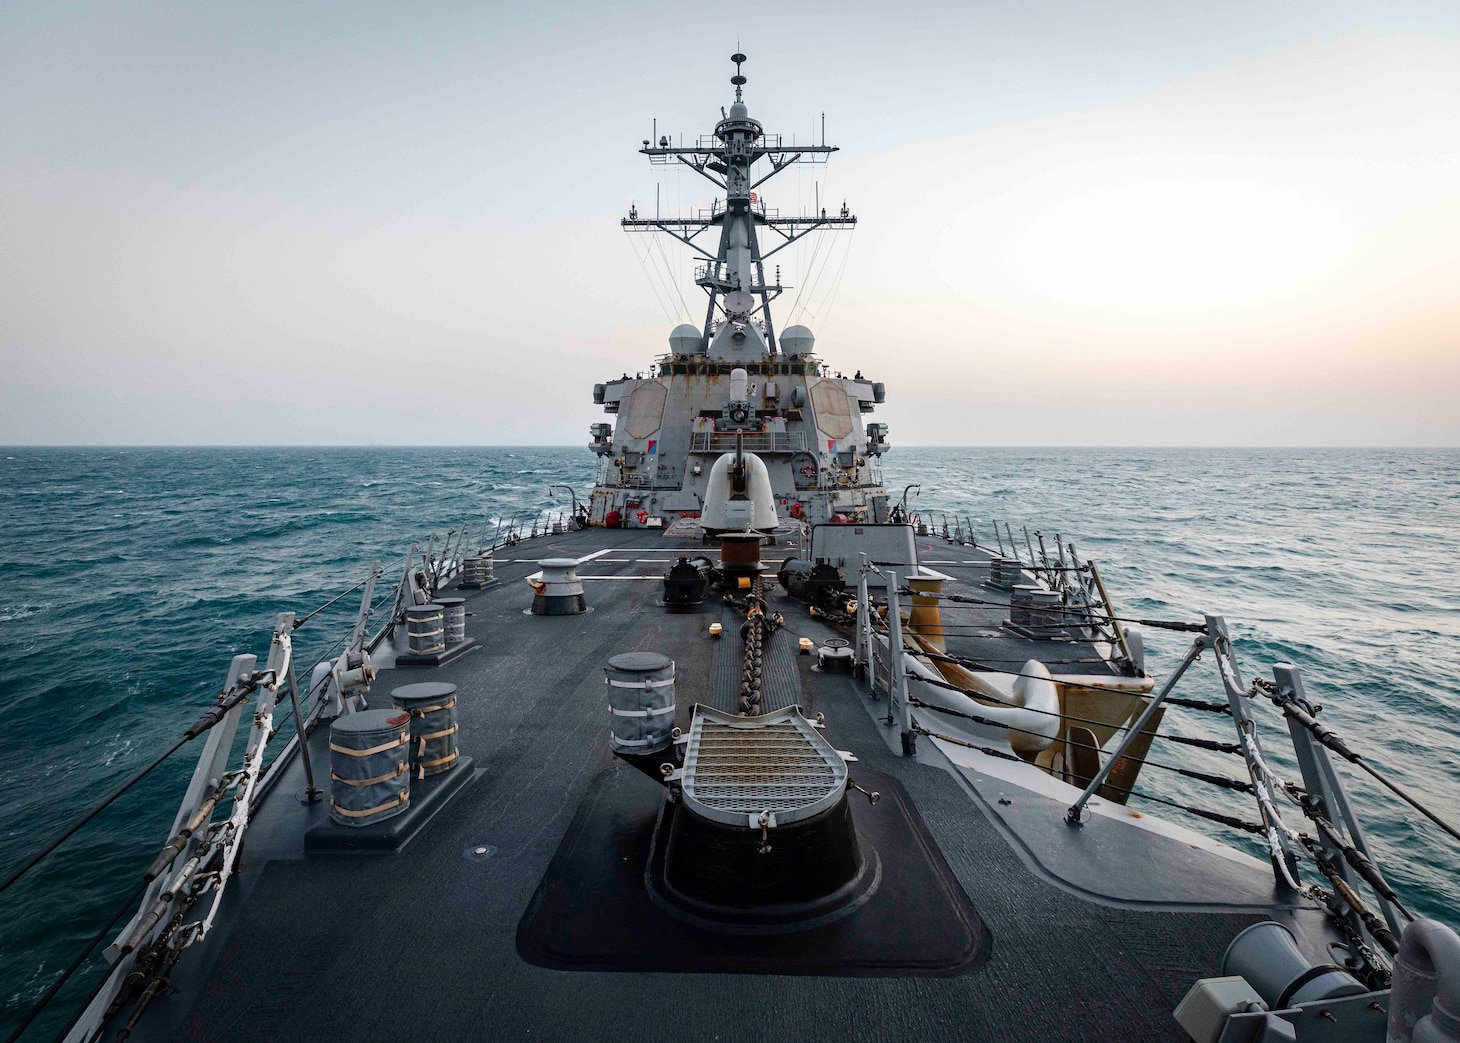 TAIWAN STRAIT - The Arleigh Burke-class guided-missile destroyer USS John S. McCain (DDG 56) is conducting routine underway operations in support of stability and security for a free and open Indo-Pacific. McCain is forward-deployed to the U.S. 7th Fleet area of operations in support of security and stability in the Indo-Pacific region.